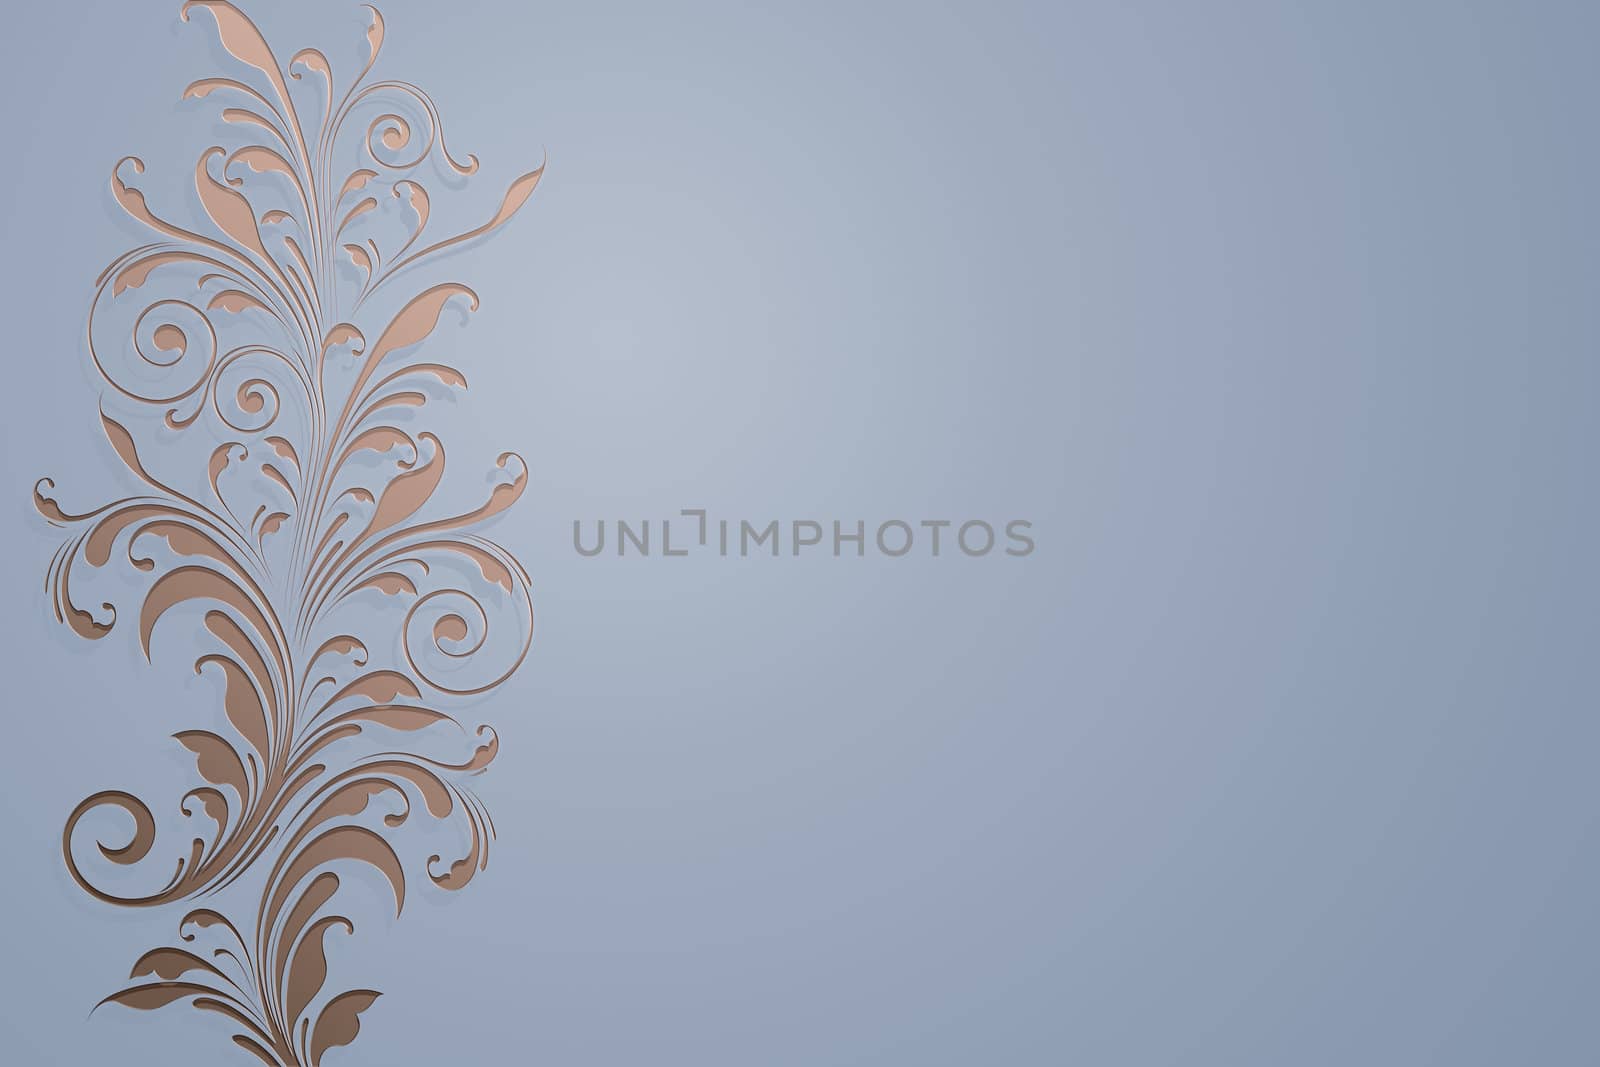 An image of a nice abstract floral background